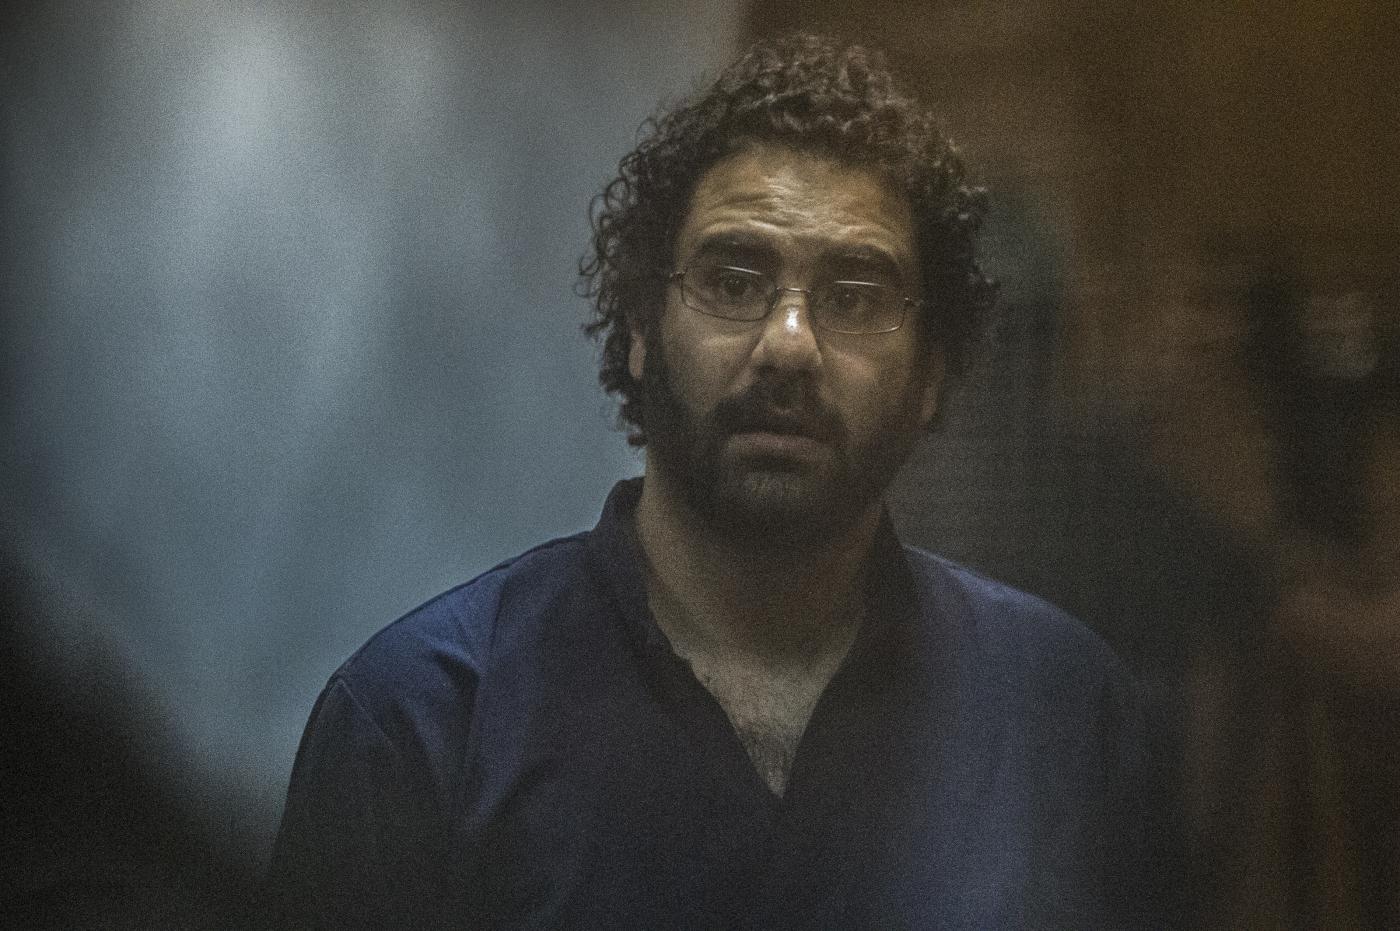 Egyptian activist and blogger Alaa Abdel Fattah looks on from behind the defendant's cage during his trial for insulting the judiciary alongside 25 other defendants including ousted Egyptian president Mohamed Morsi, who was recently sentenced to death, in Cairo on May 23, 201